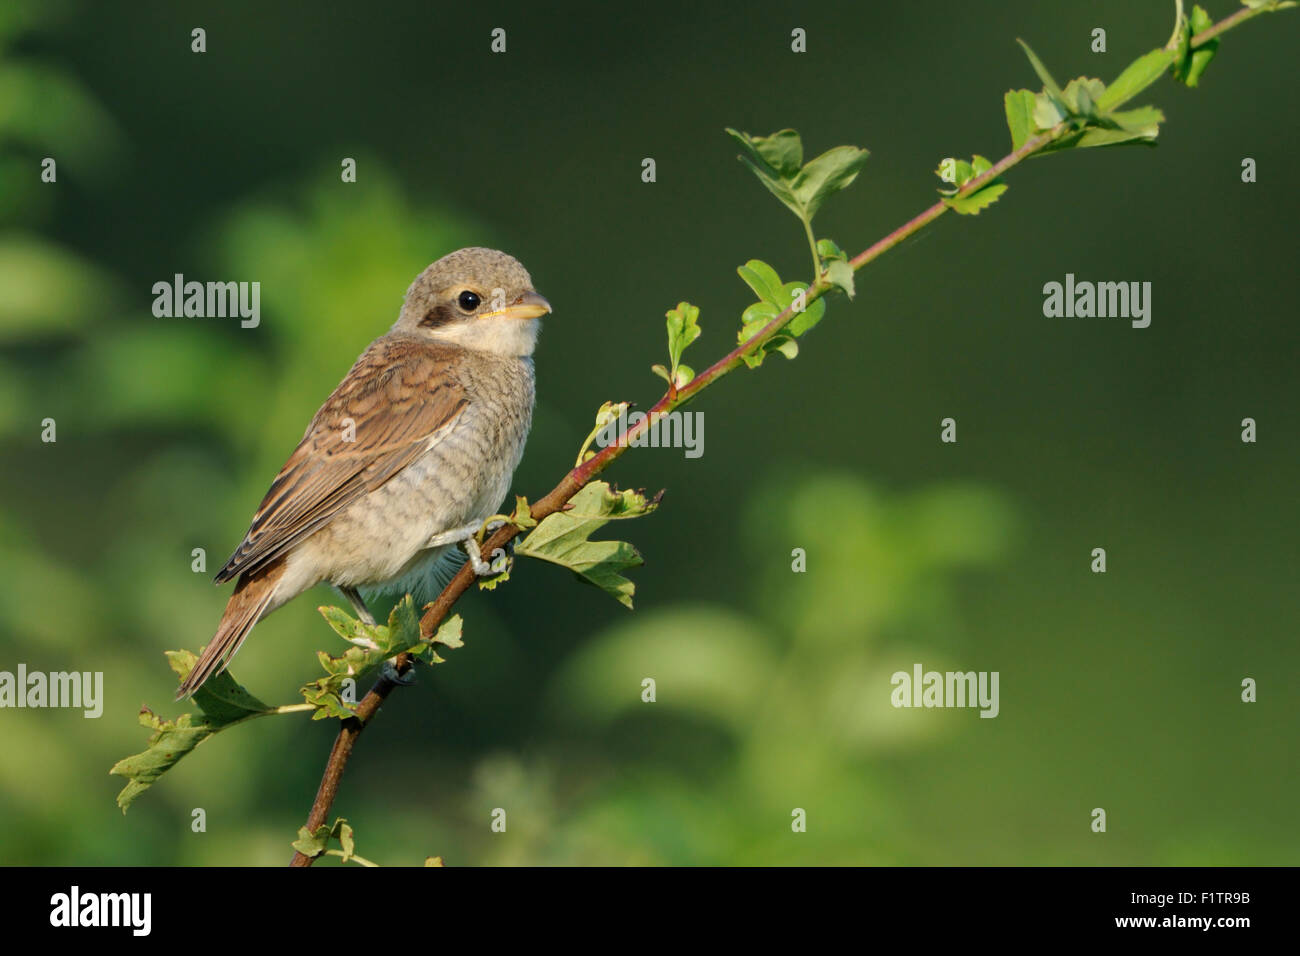 Young Red-backed shrike / Neuntoeter ( Lanius collurio ) perching on an exposed branch of a hedge between green leaves. Stock Photo